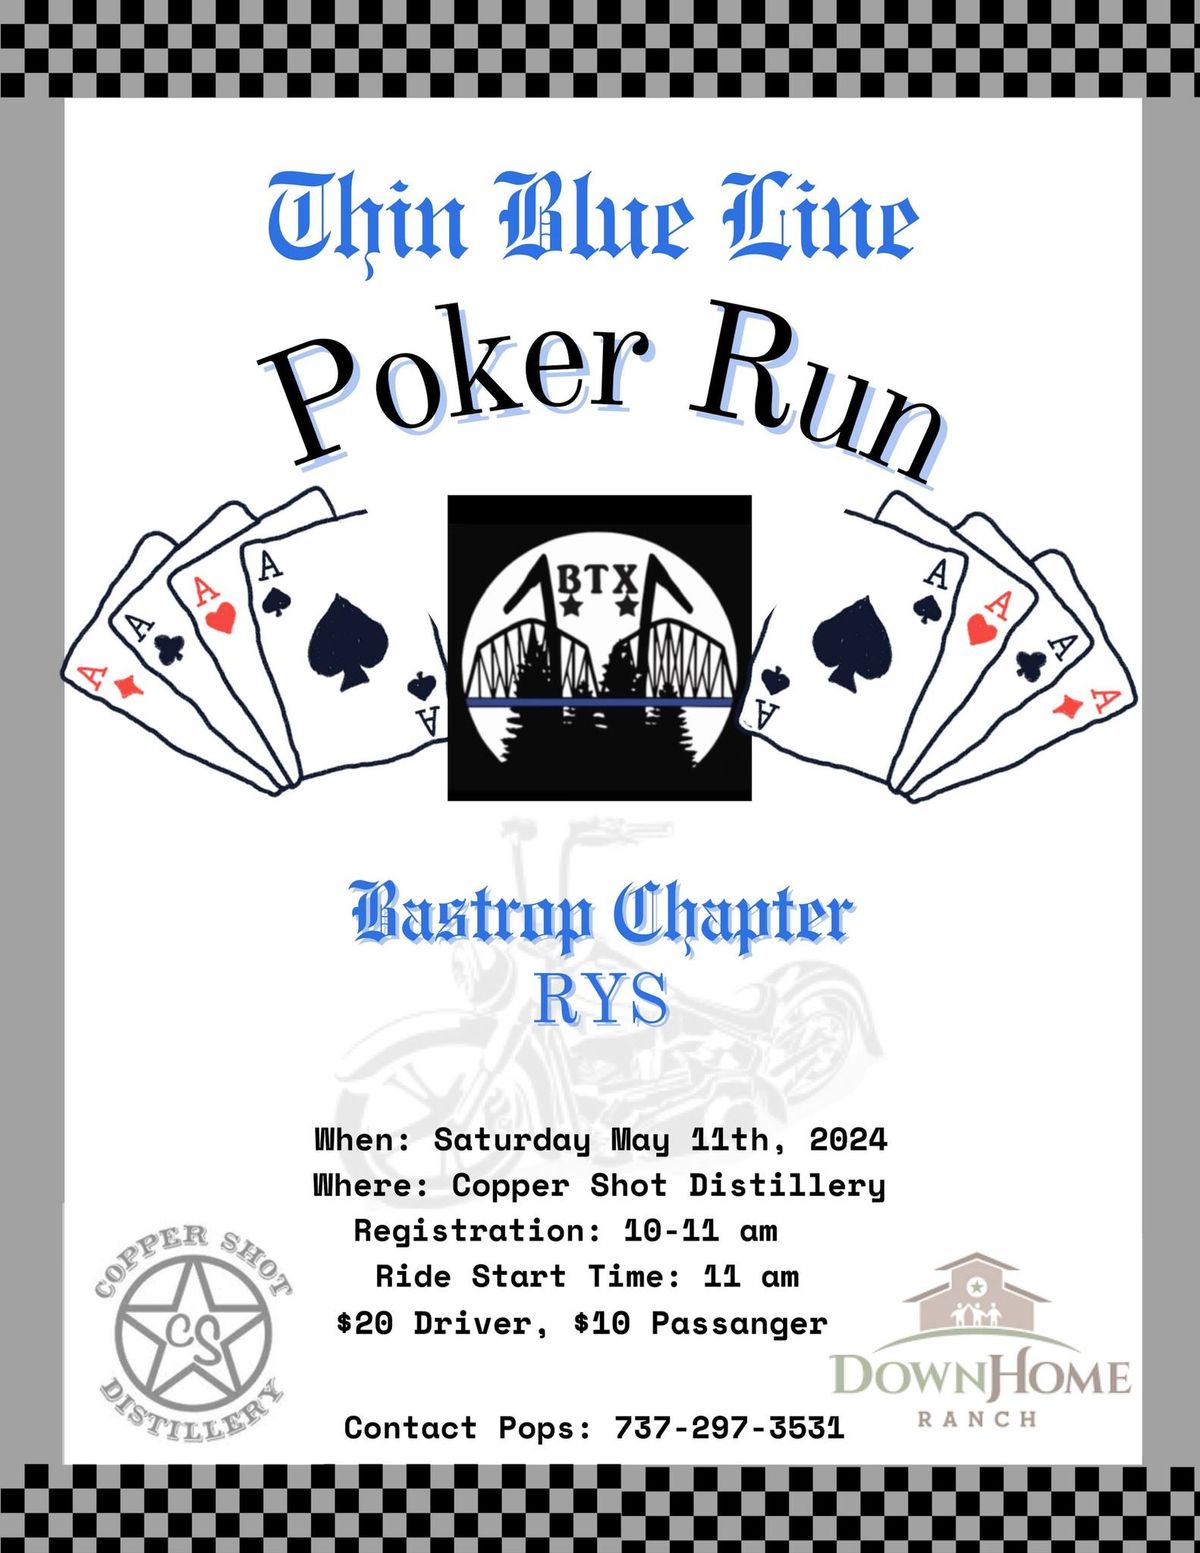 Bastrop Chapter of the Thin Blue Line LE MC RYS Poker Run